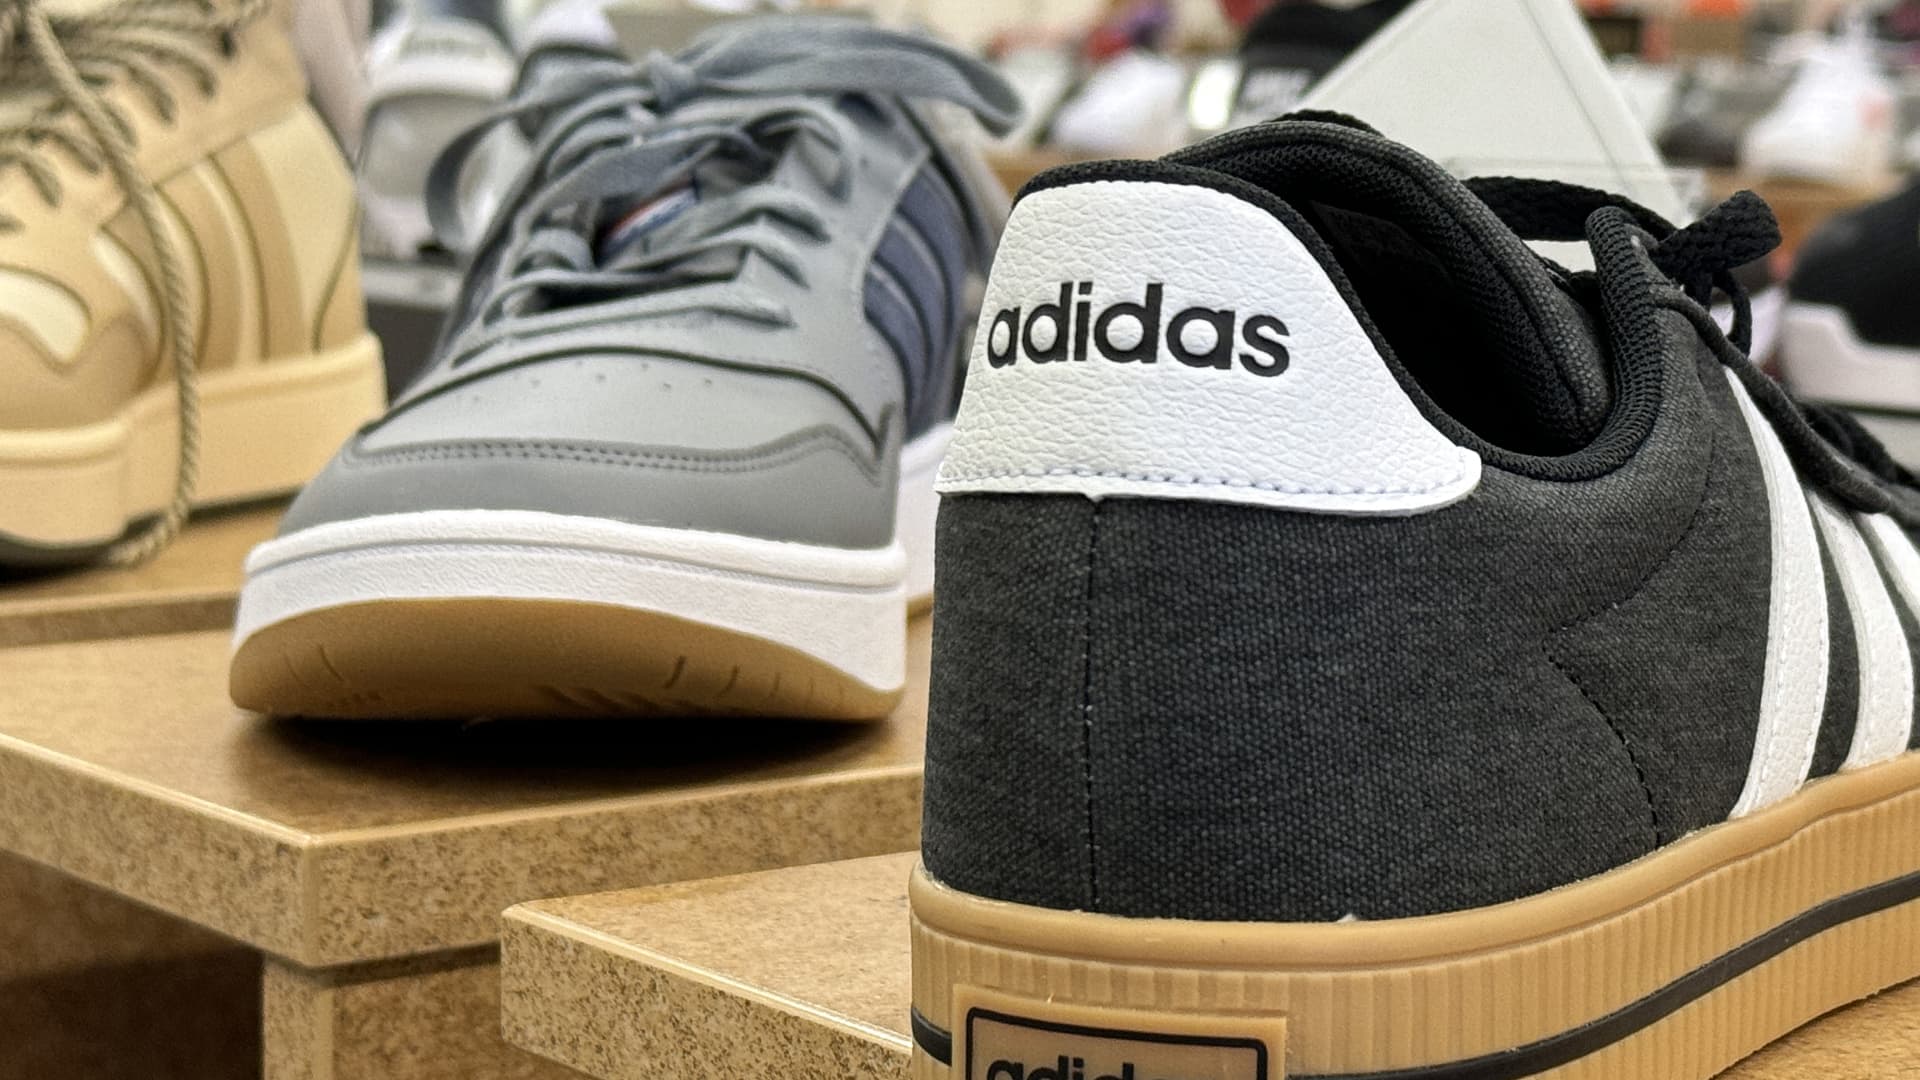 Adidas shares rise after first-quarter revenue hike, improved outlook